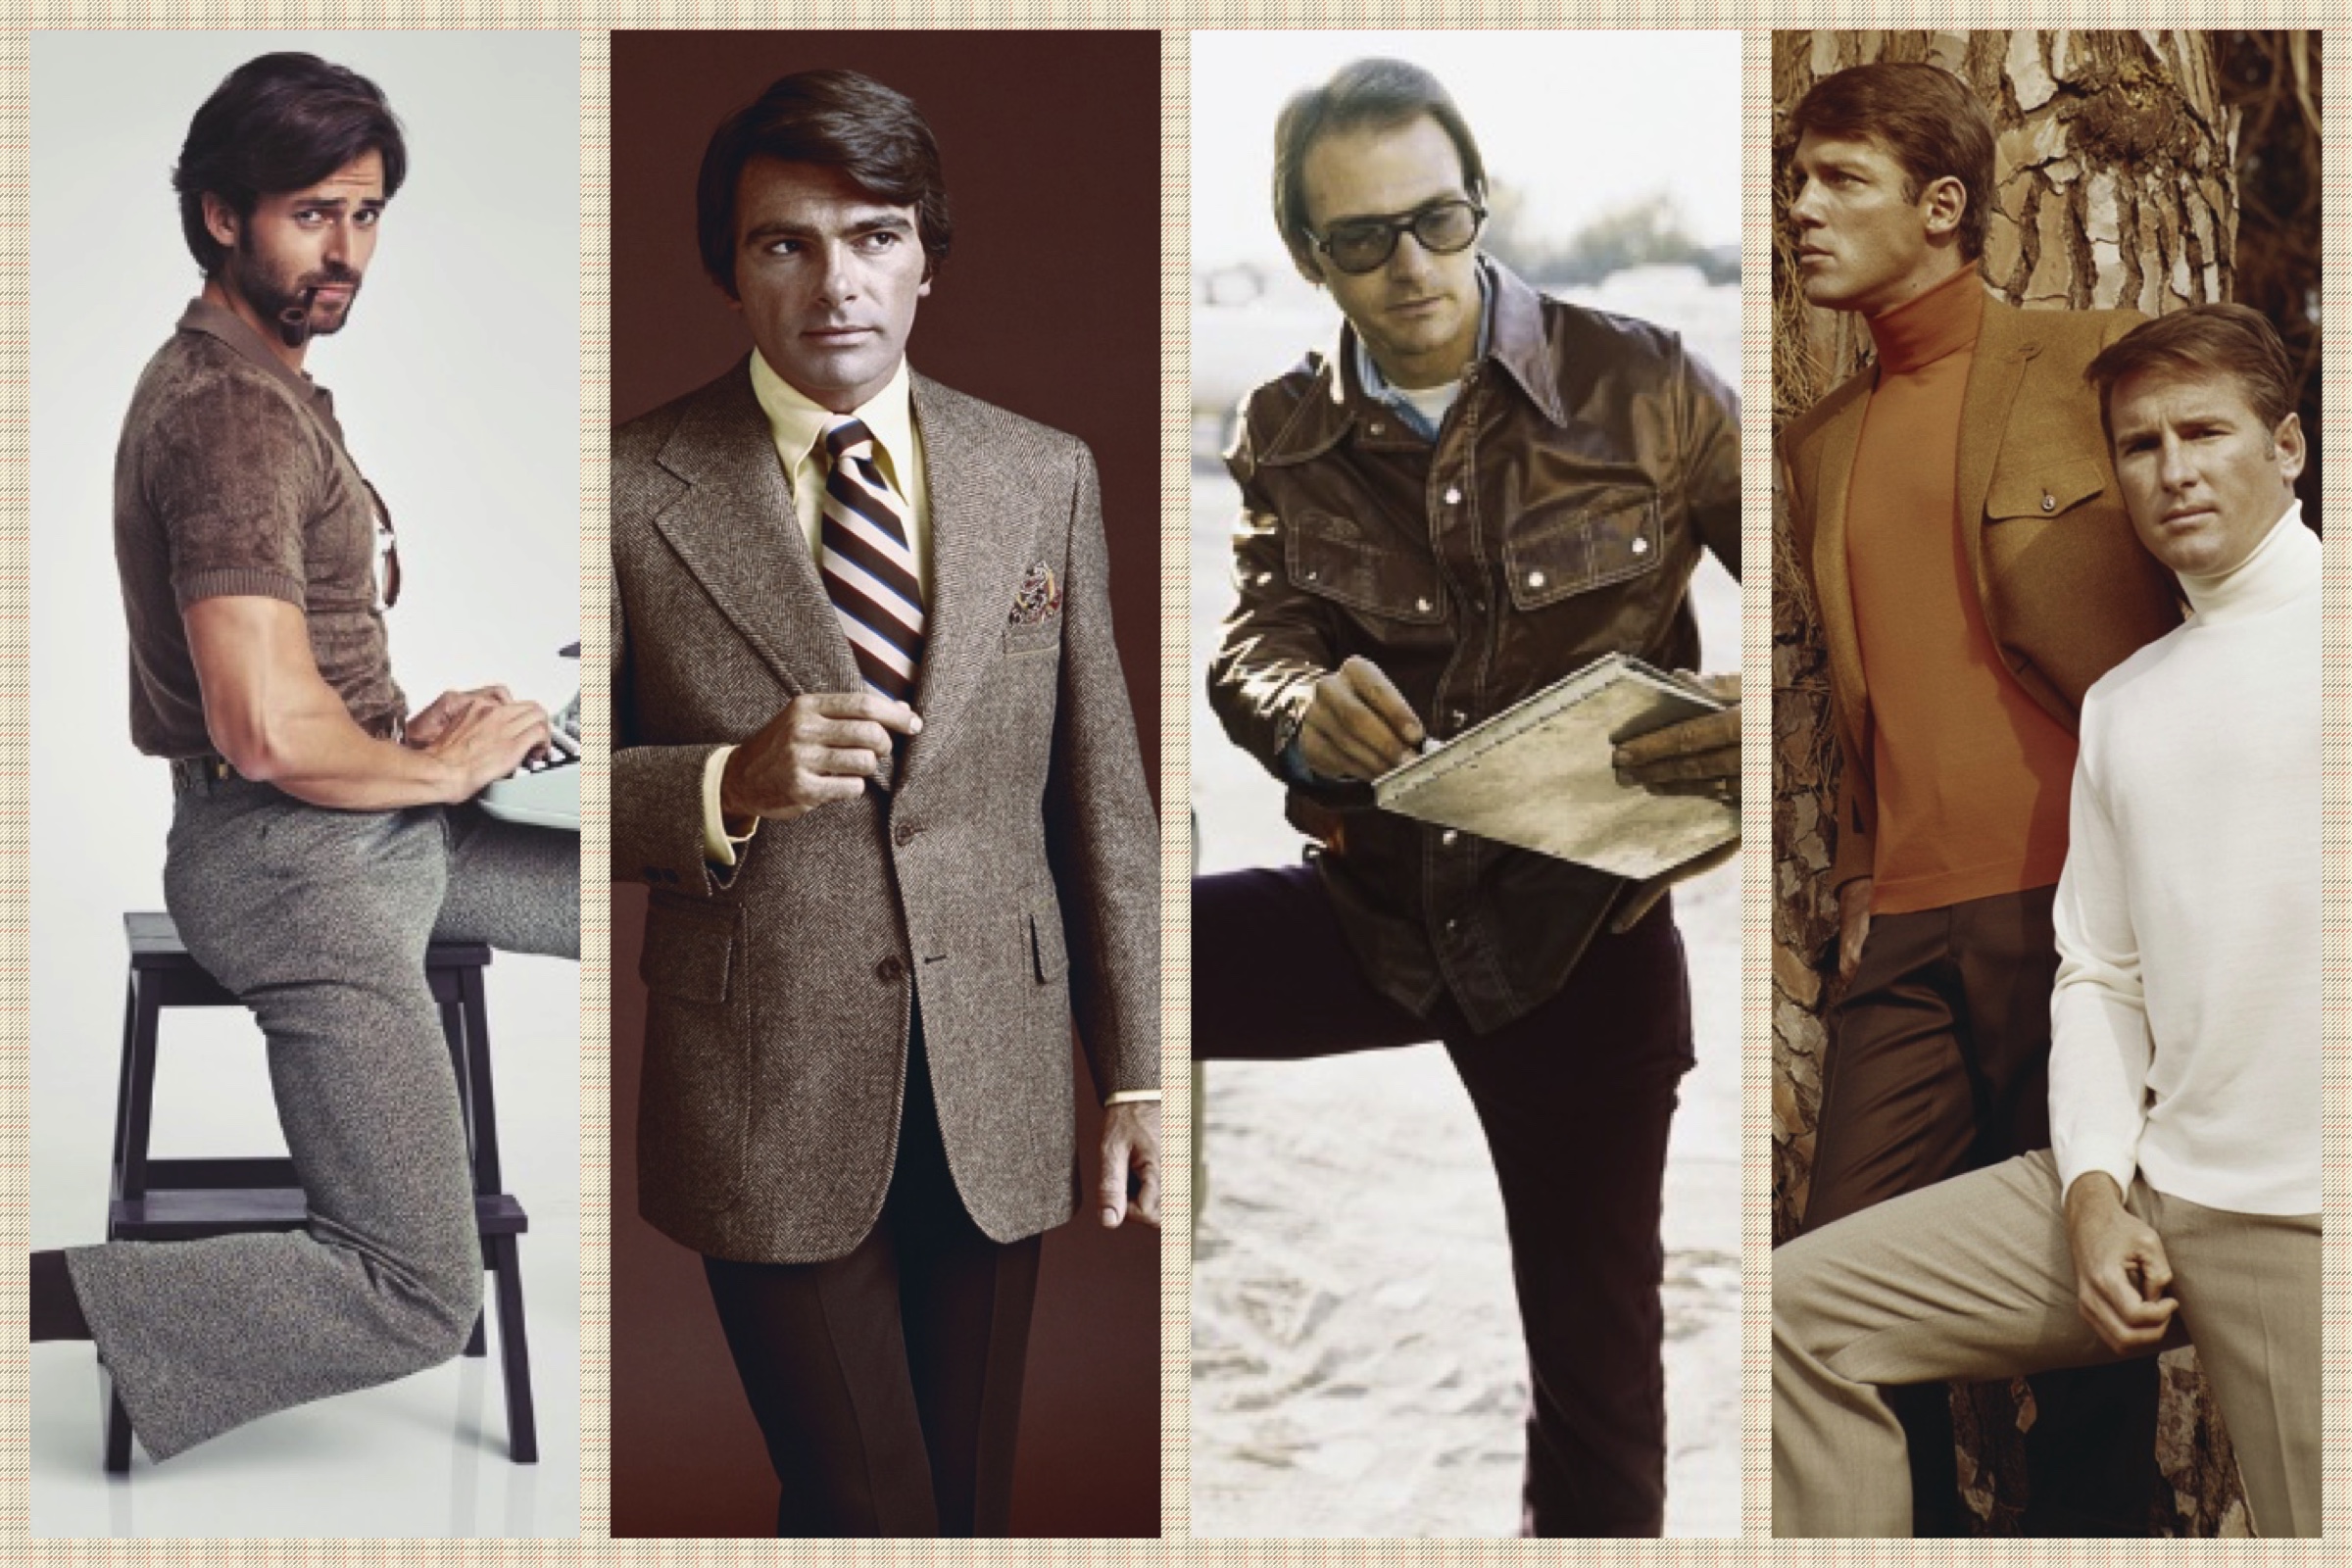 70's Fashion for Men - Groovy Outfits & Bold Styles